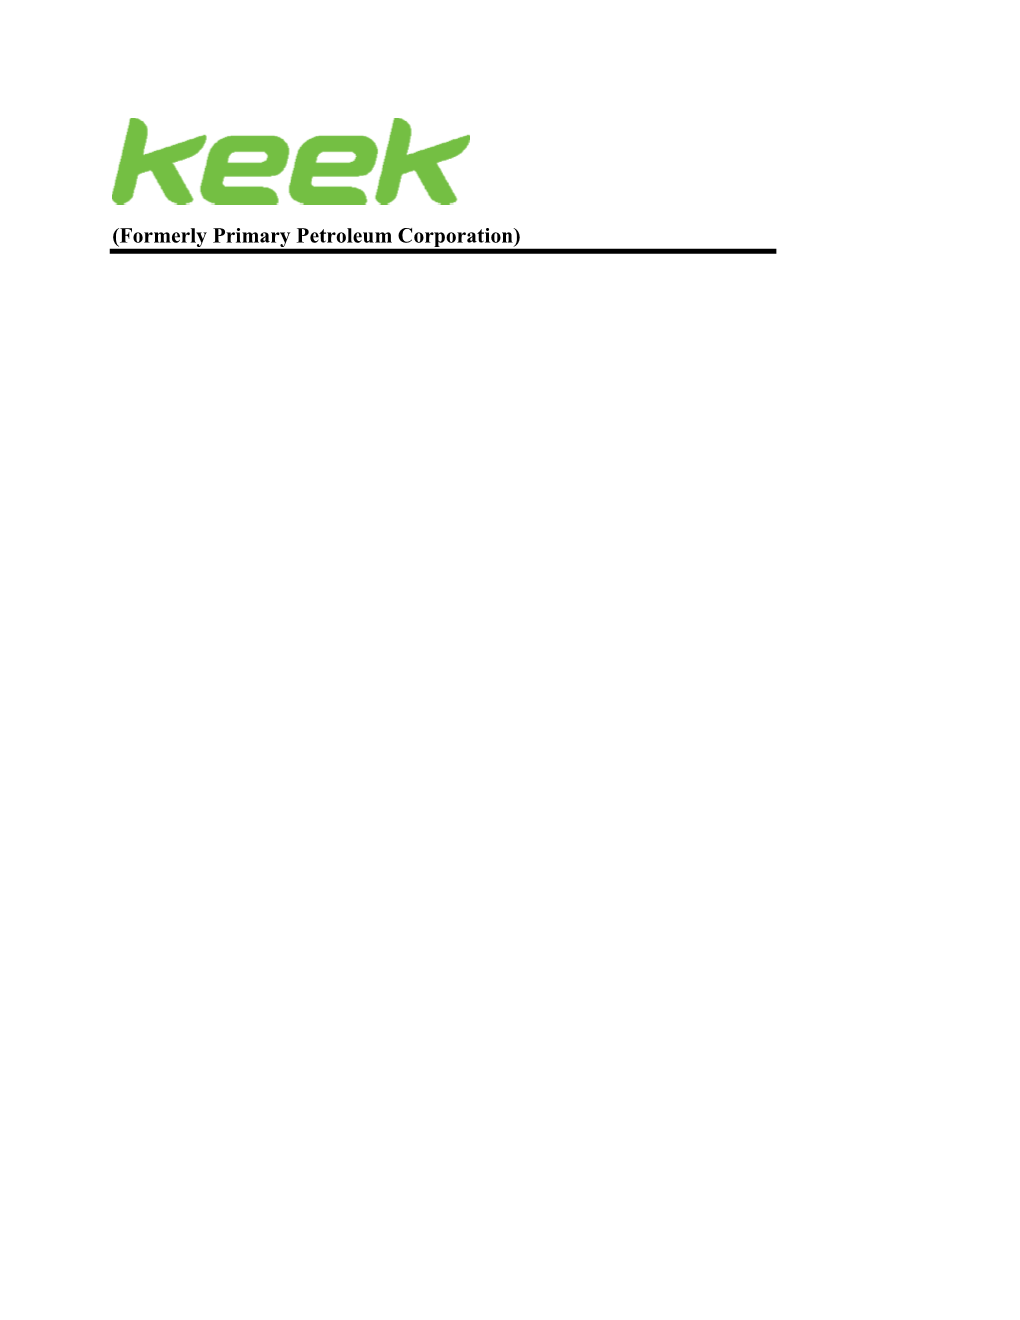 Keek MD&A Second Quarter 2015 (With TM Comments